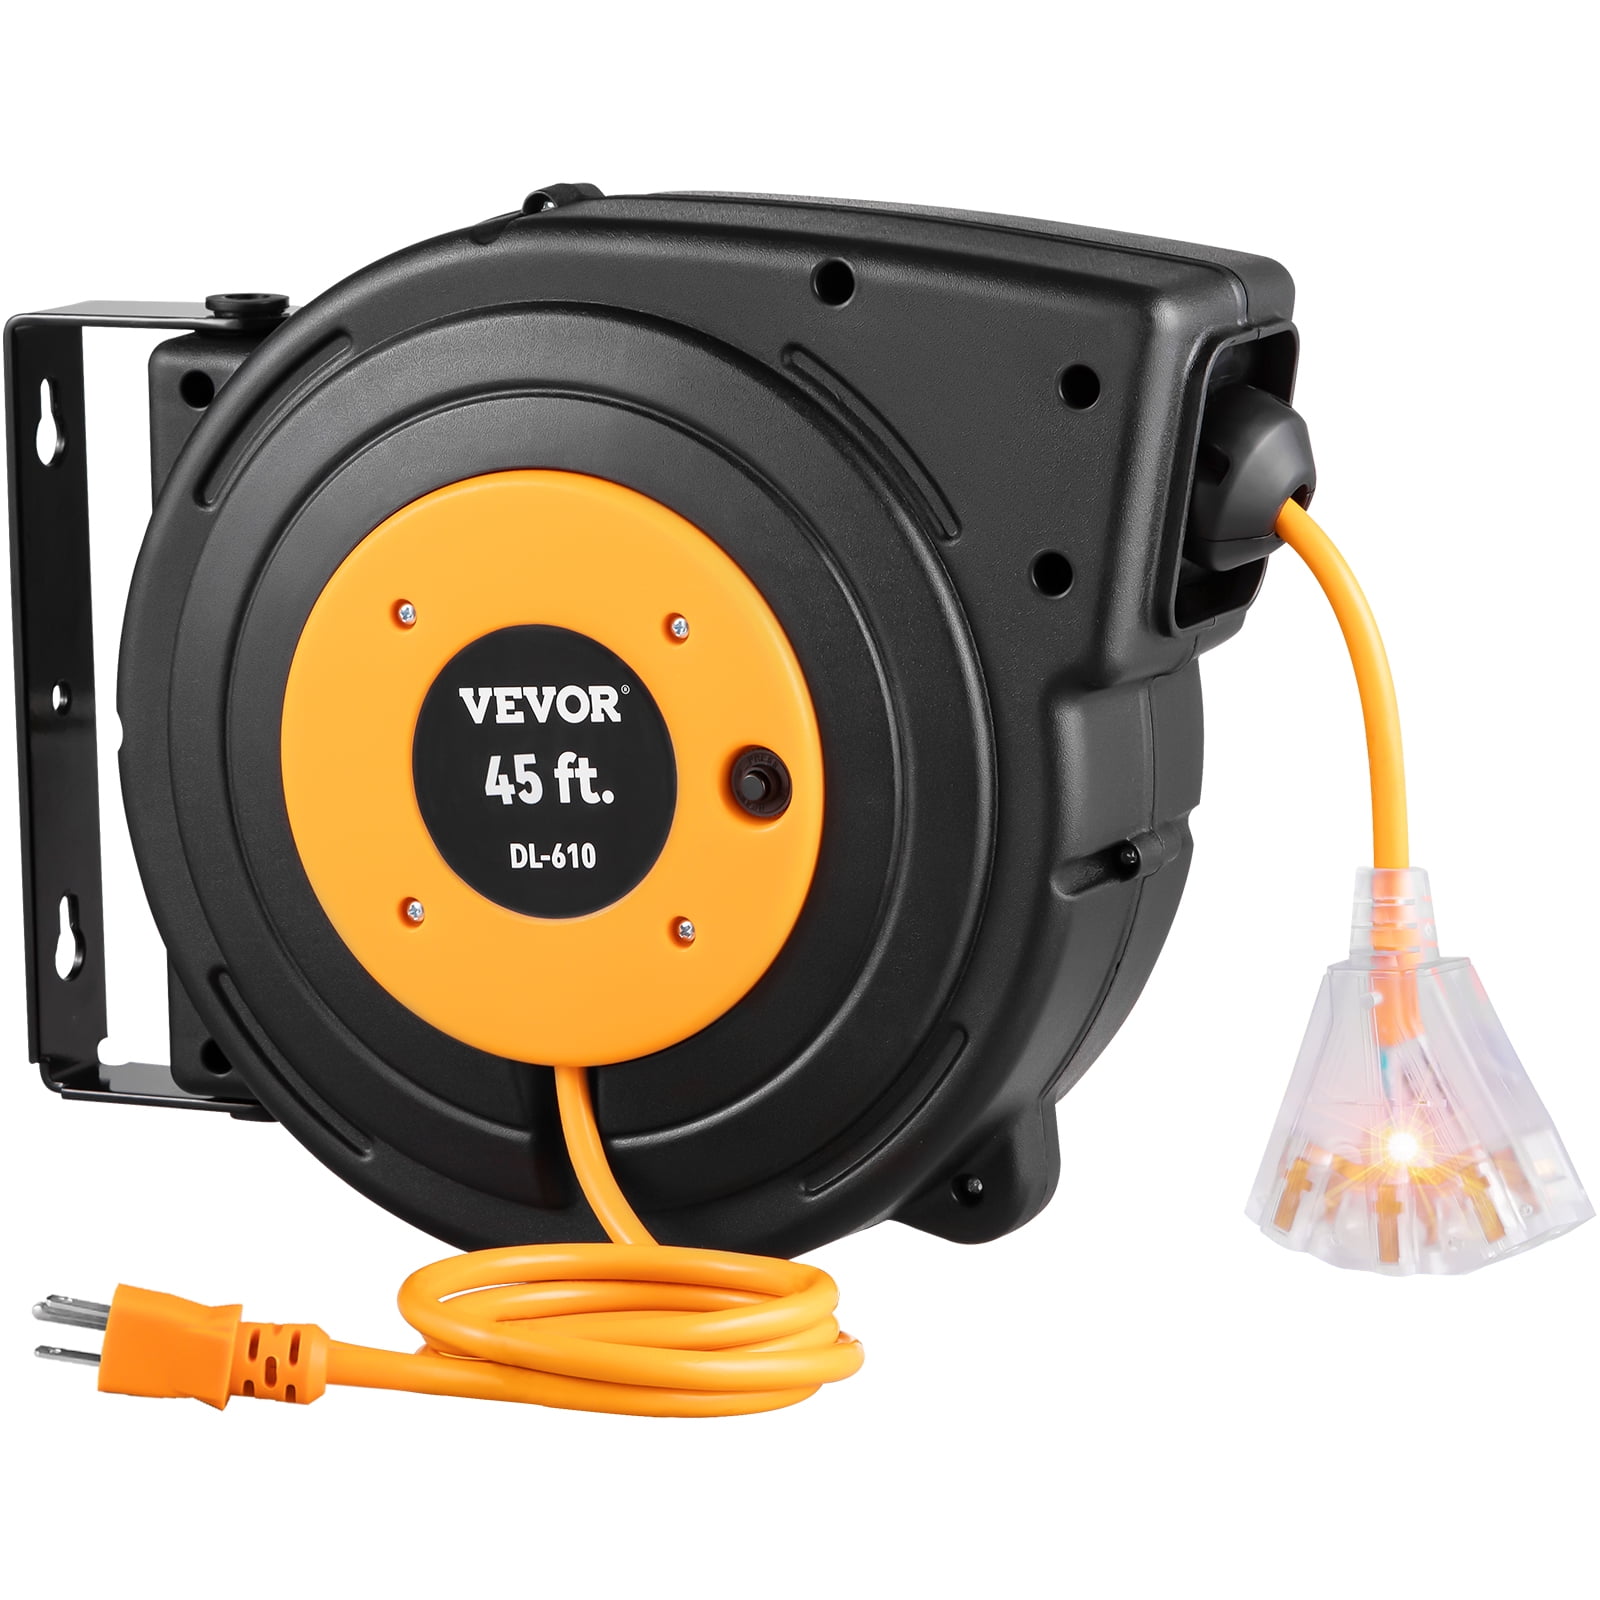 Bentism Retractable Extension Cord Reel Power Cord Reel 45ft 12AWG/3C Sjtow UL, Size: 13.38 x 11.97 x 5.39 in /34 x 30.4 x 13.7 cm